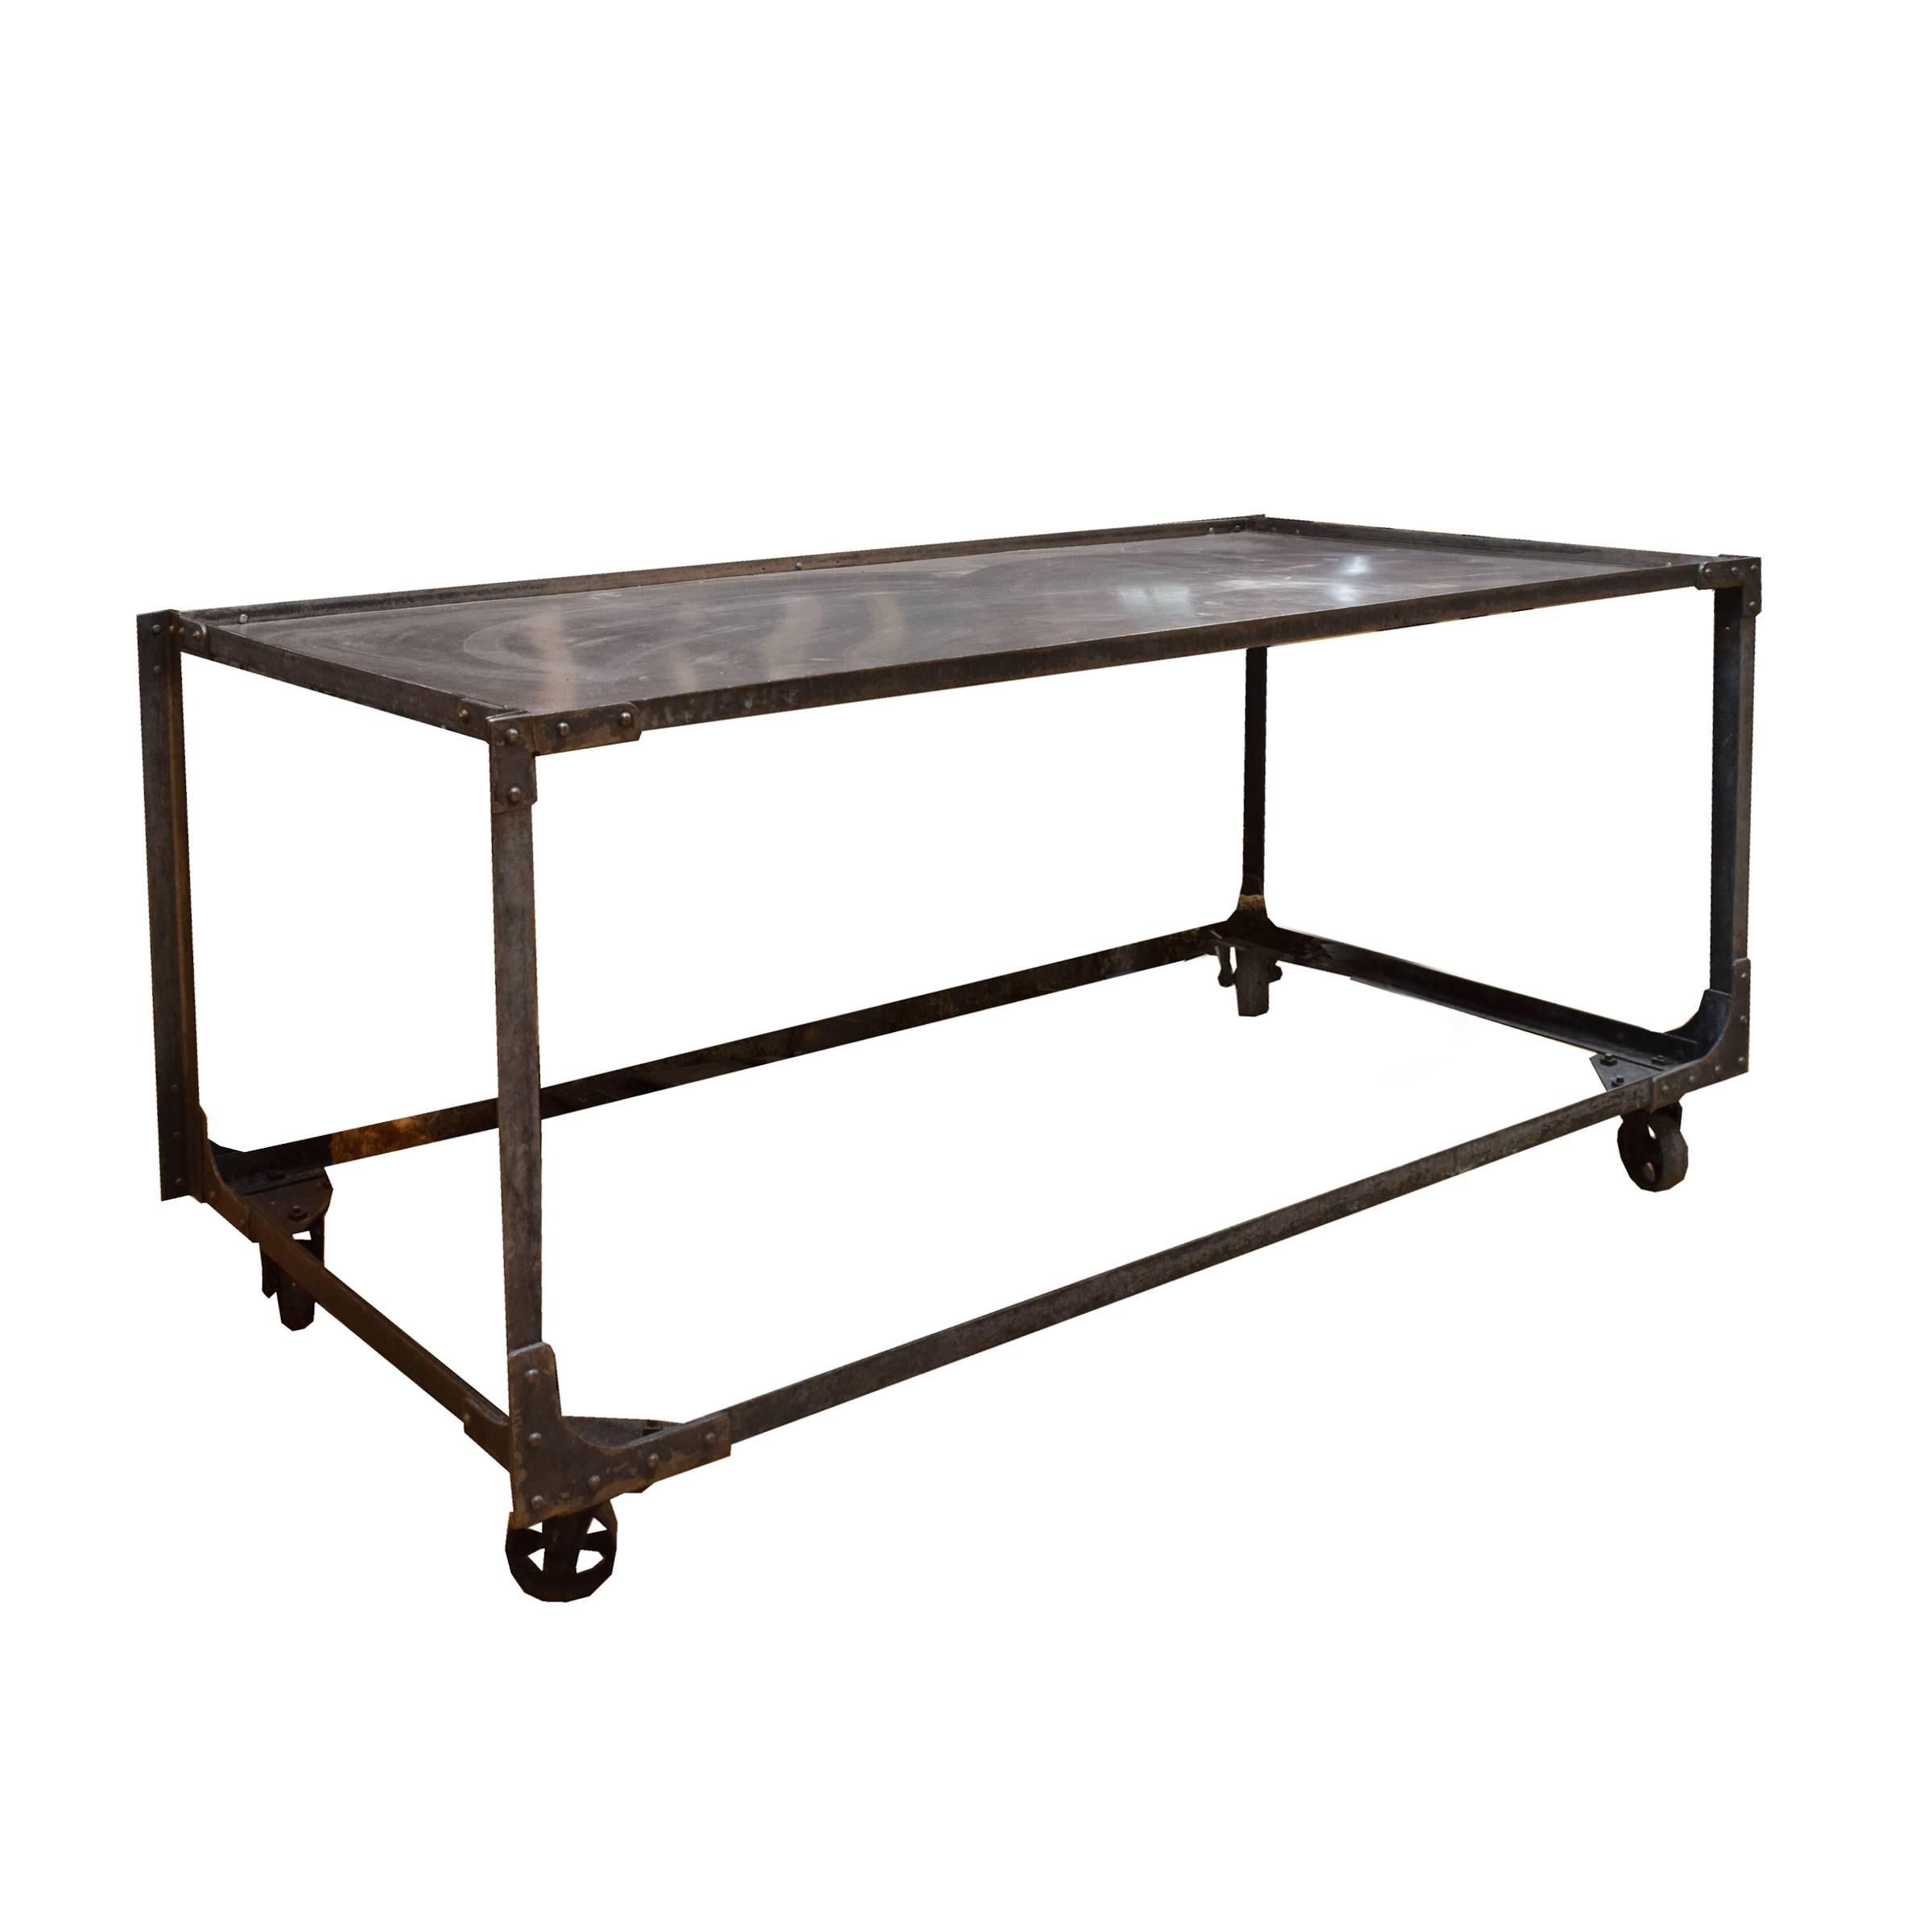 A large American Industrial metal table on castors, circa 1920.
Add a butcher block top and it's perfect for a kitchen.